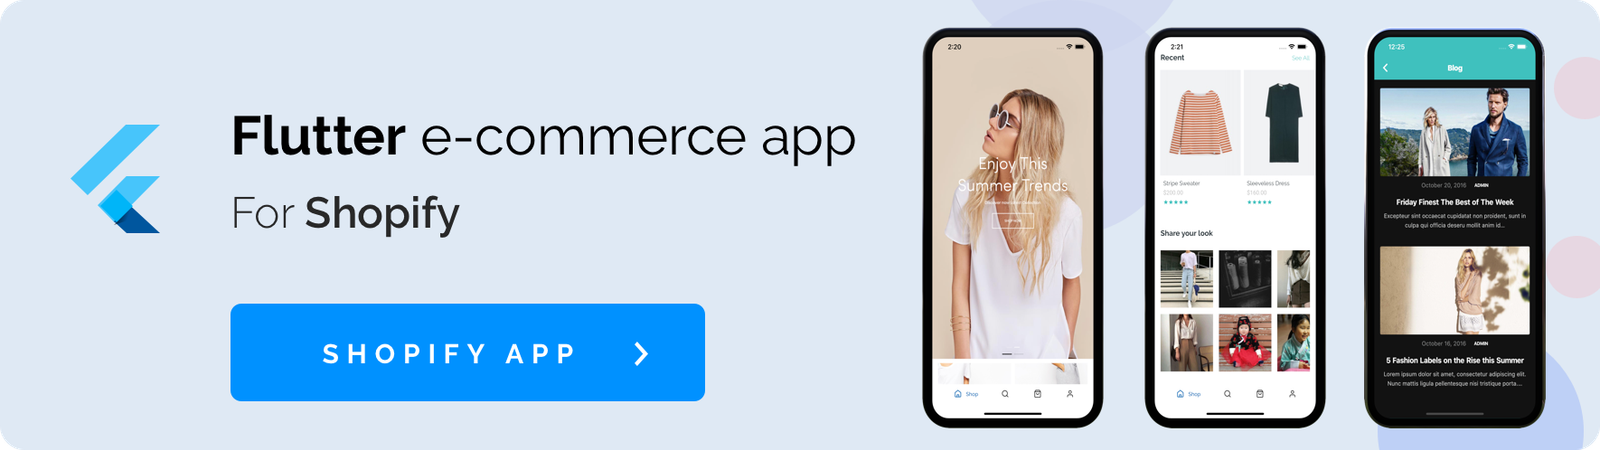 MStore Magento - the complete react native app for Magento 2 - 13